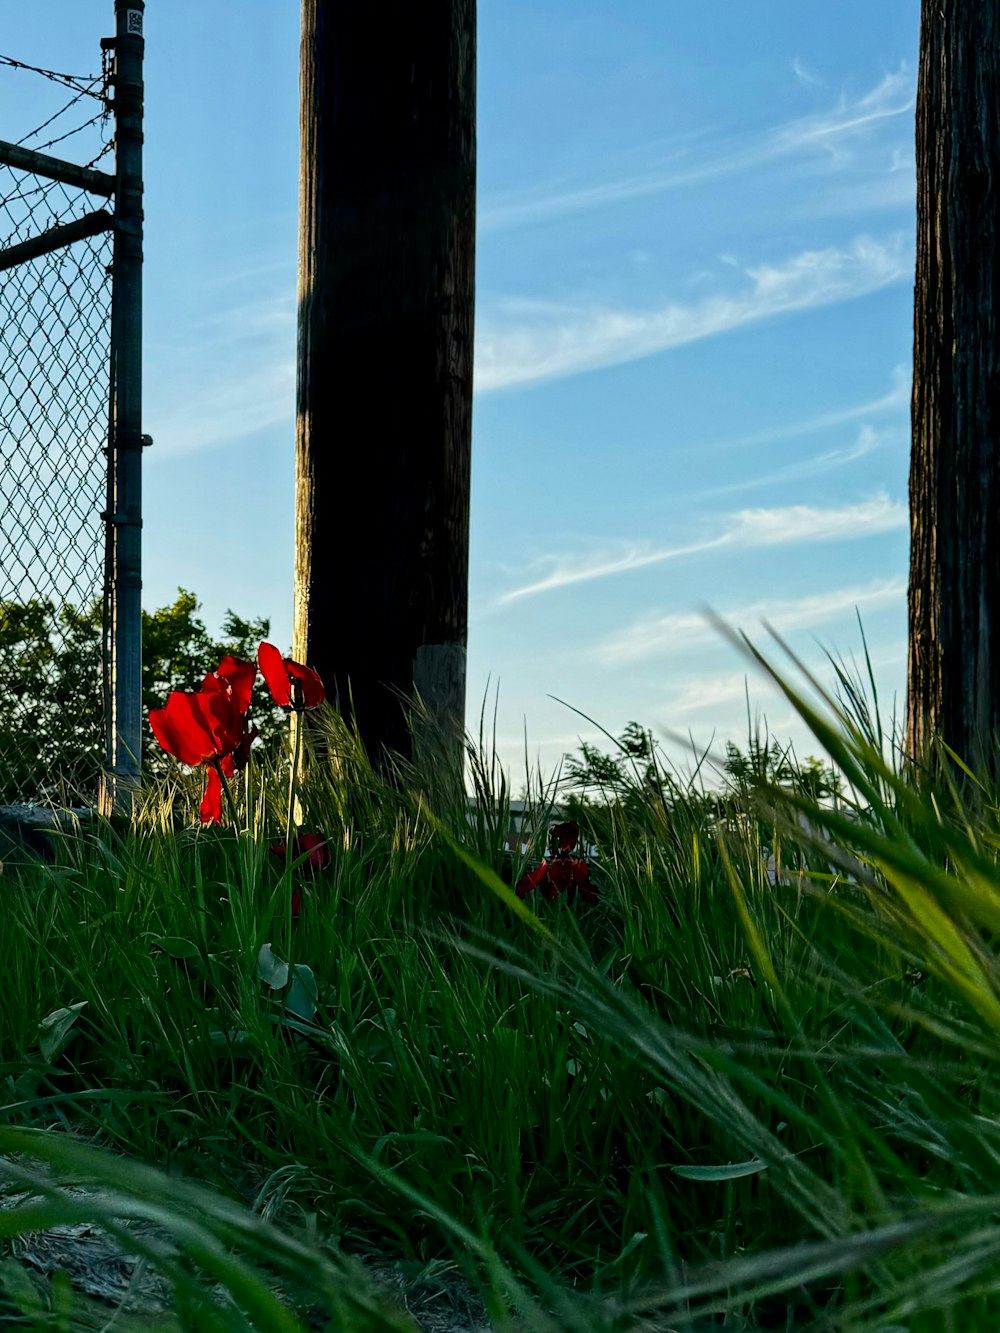 a red fire hydrant sitting in the grass next to a fence